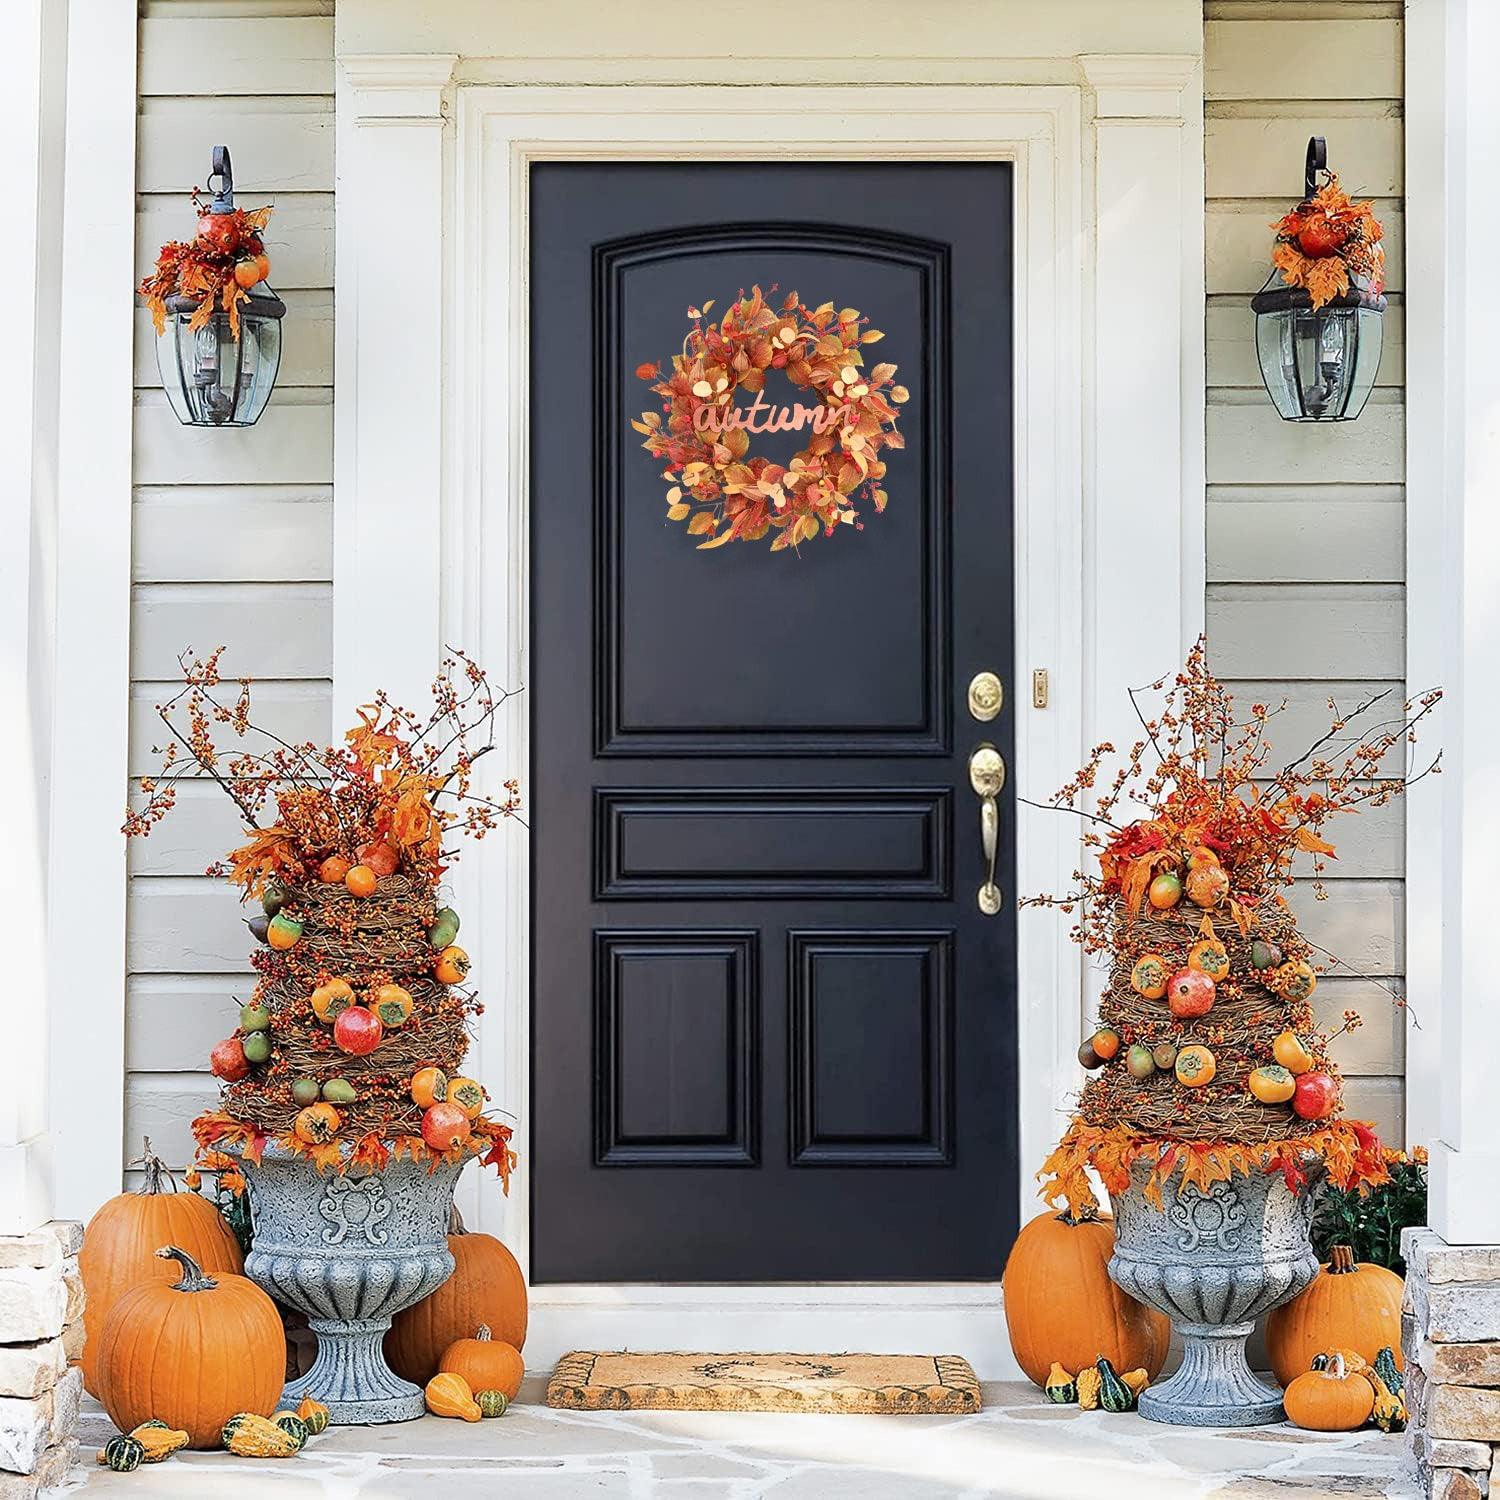 22-Inch Physalis Wreath Fall Wreaths for Front Door with Golden Berries - Tokcare Home